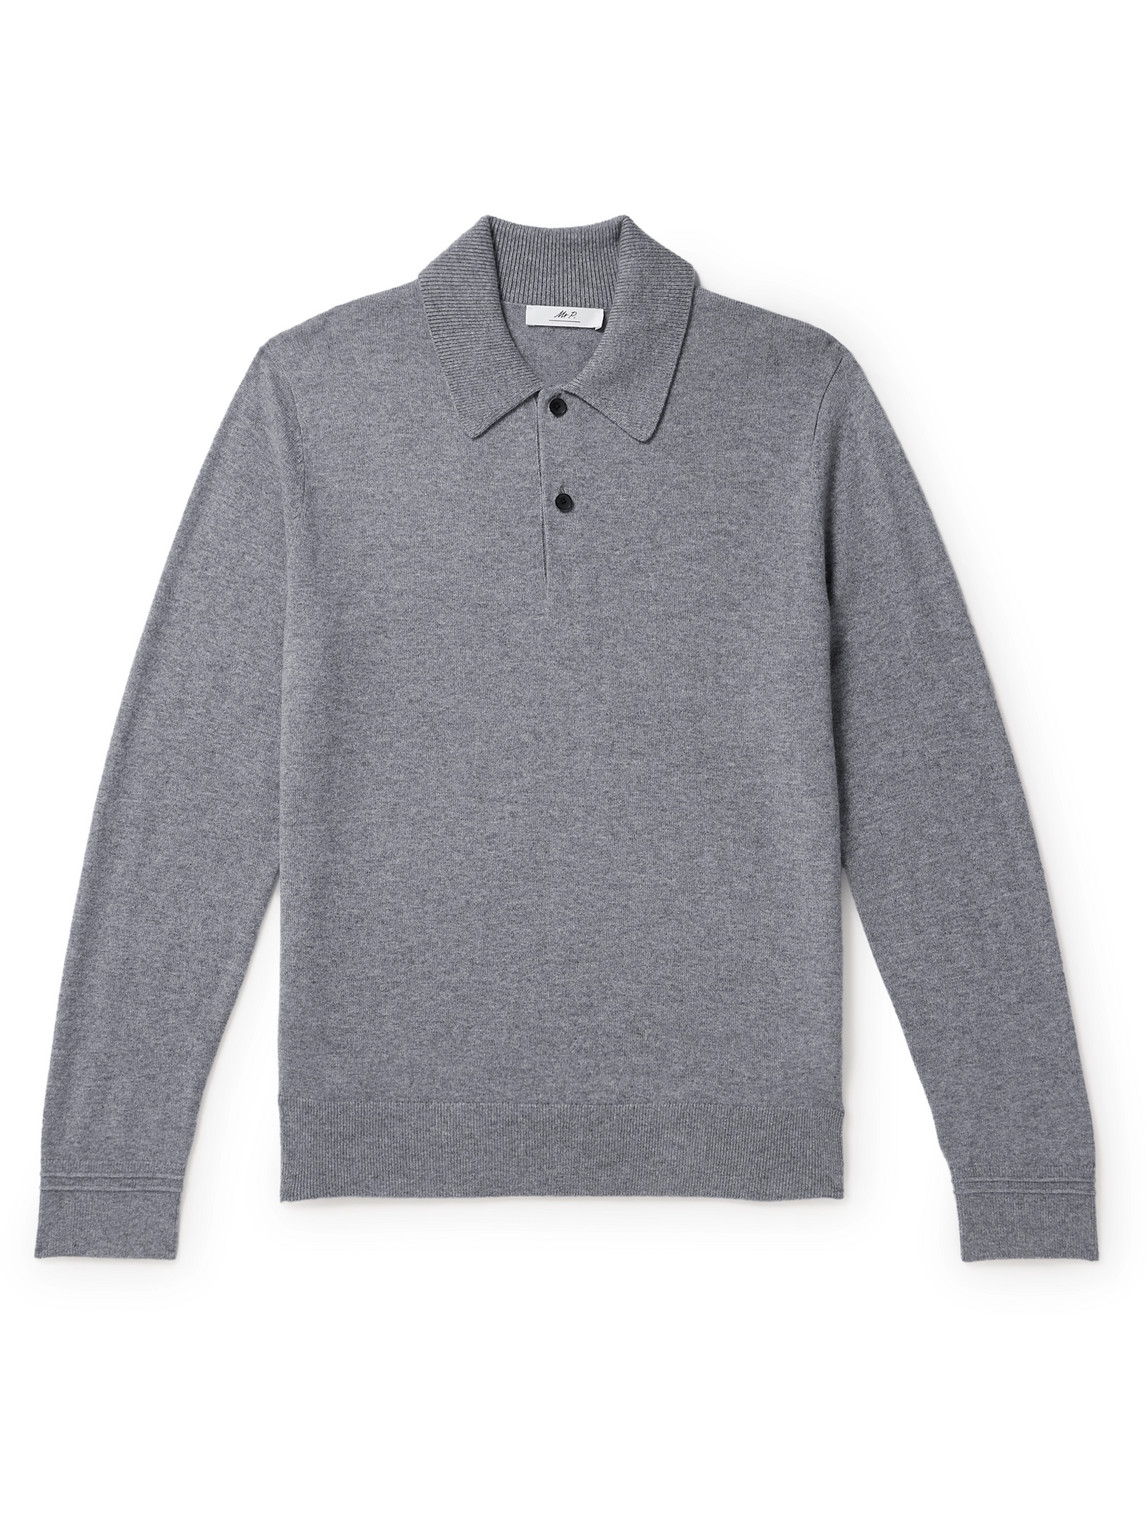 Mr P Cashmere Polo Shirt In Gray